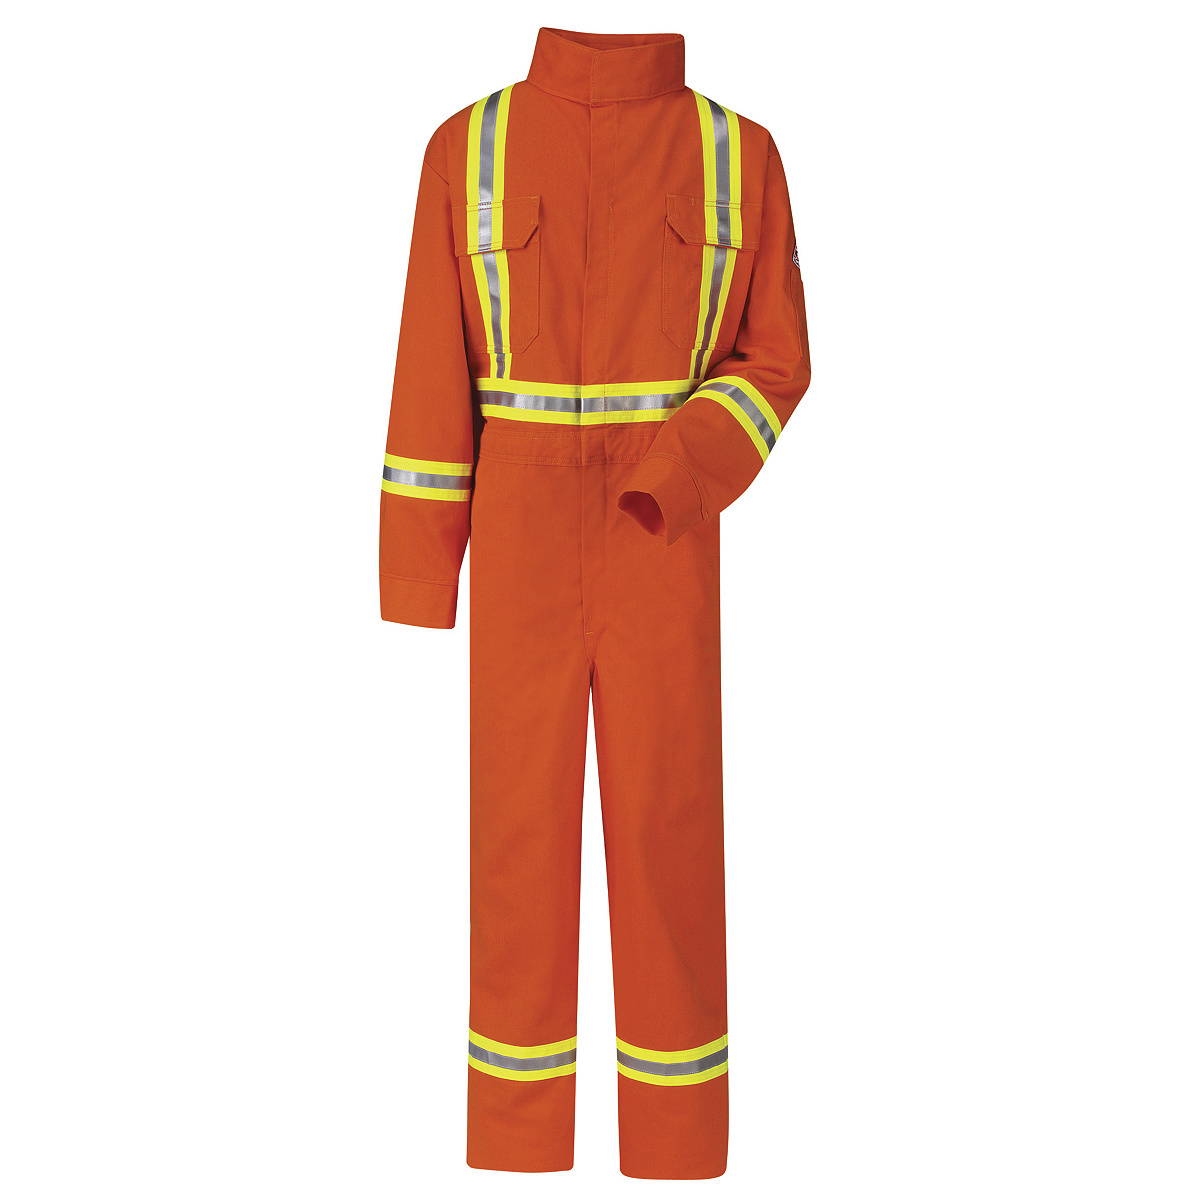 Bulwark® 48 Tall Orange Westex Ultrasoft® Twill/Cotton/Nylon Flame Resistant Coveralls With Zipper Front Closure And Reflective